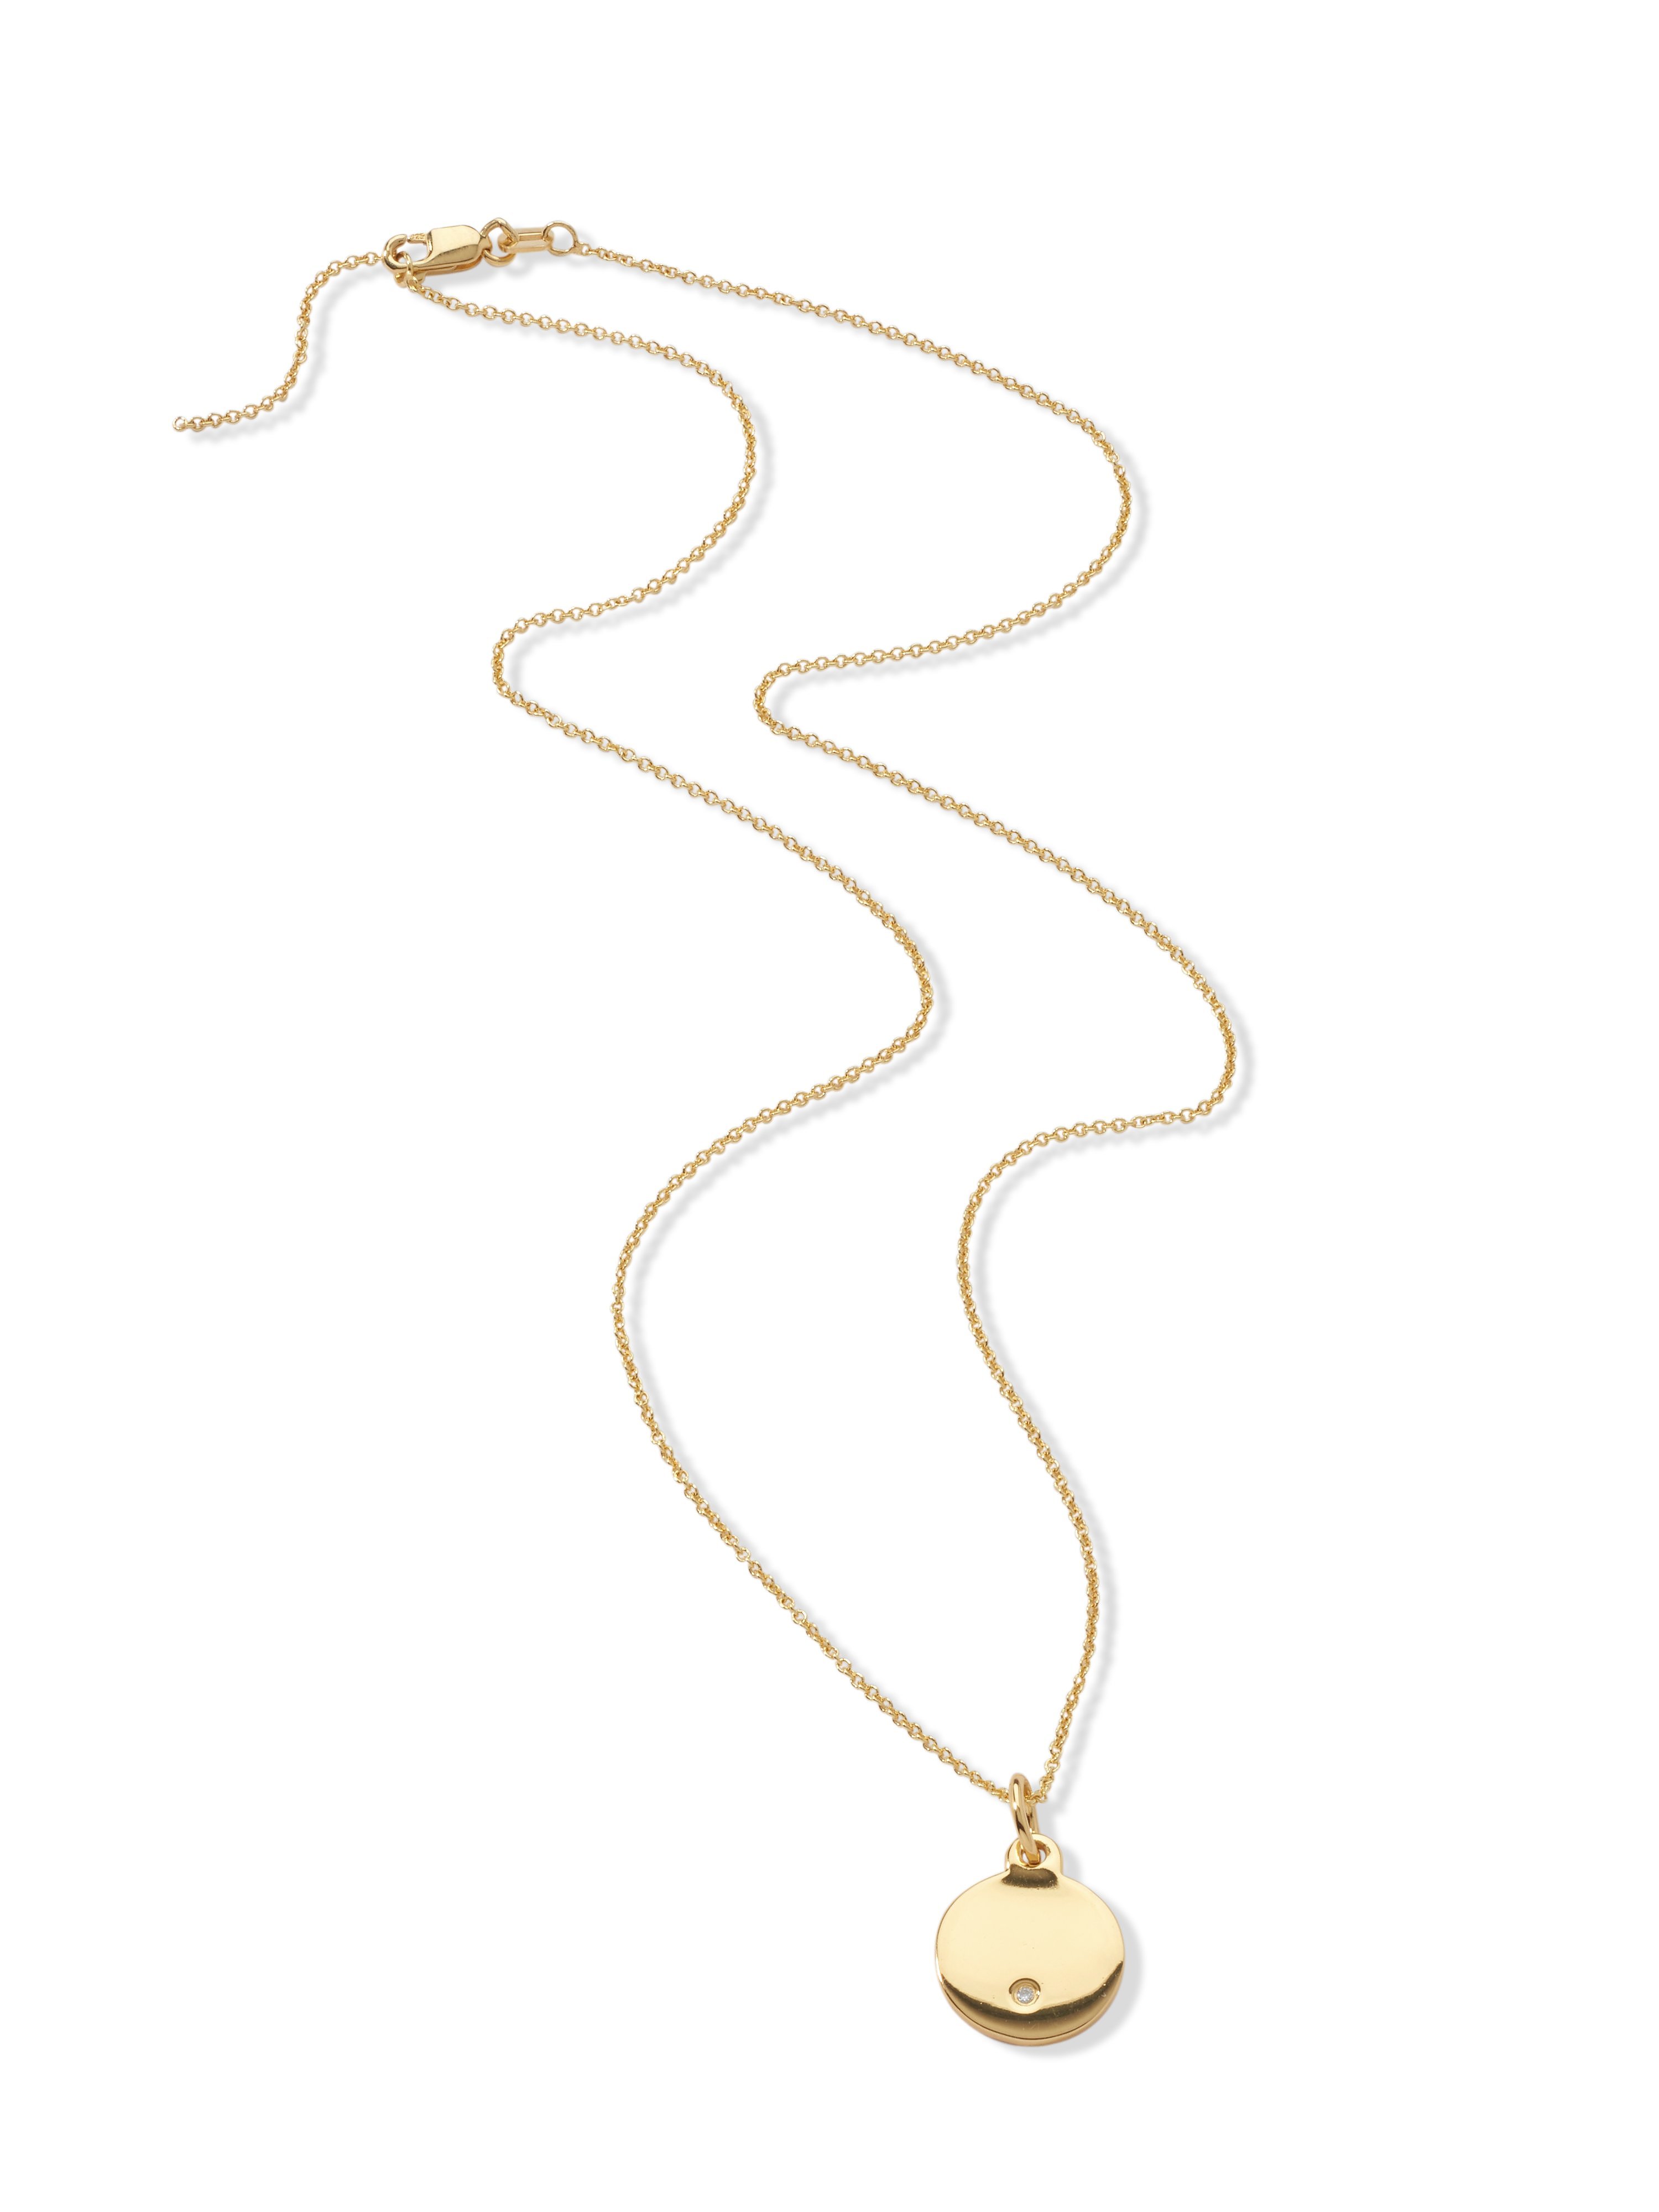 Necklace made of gold-plated 925 sterling silver Uta Raasch gold